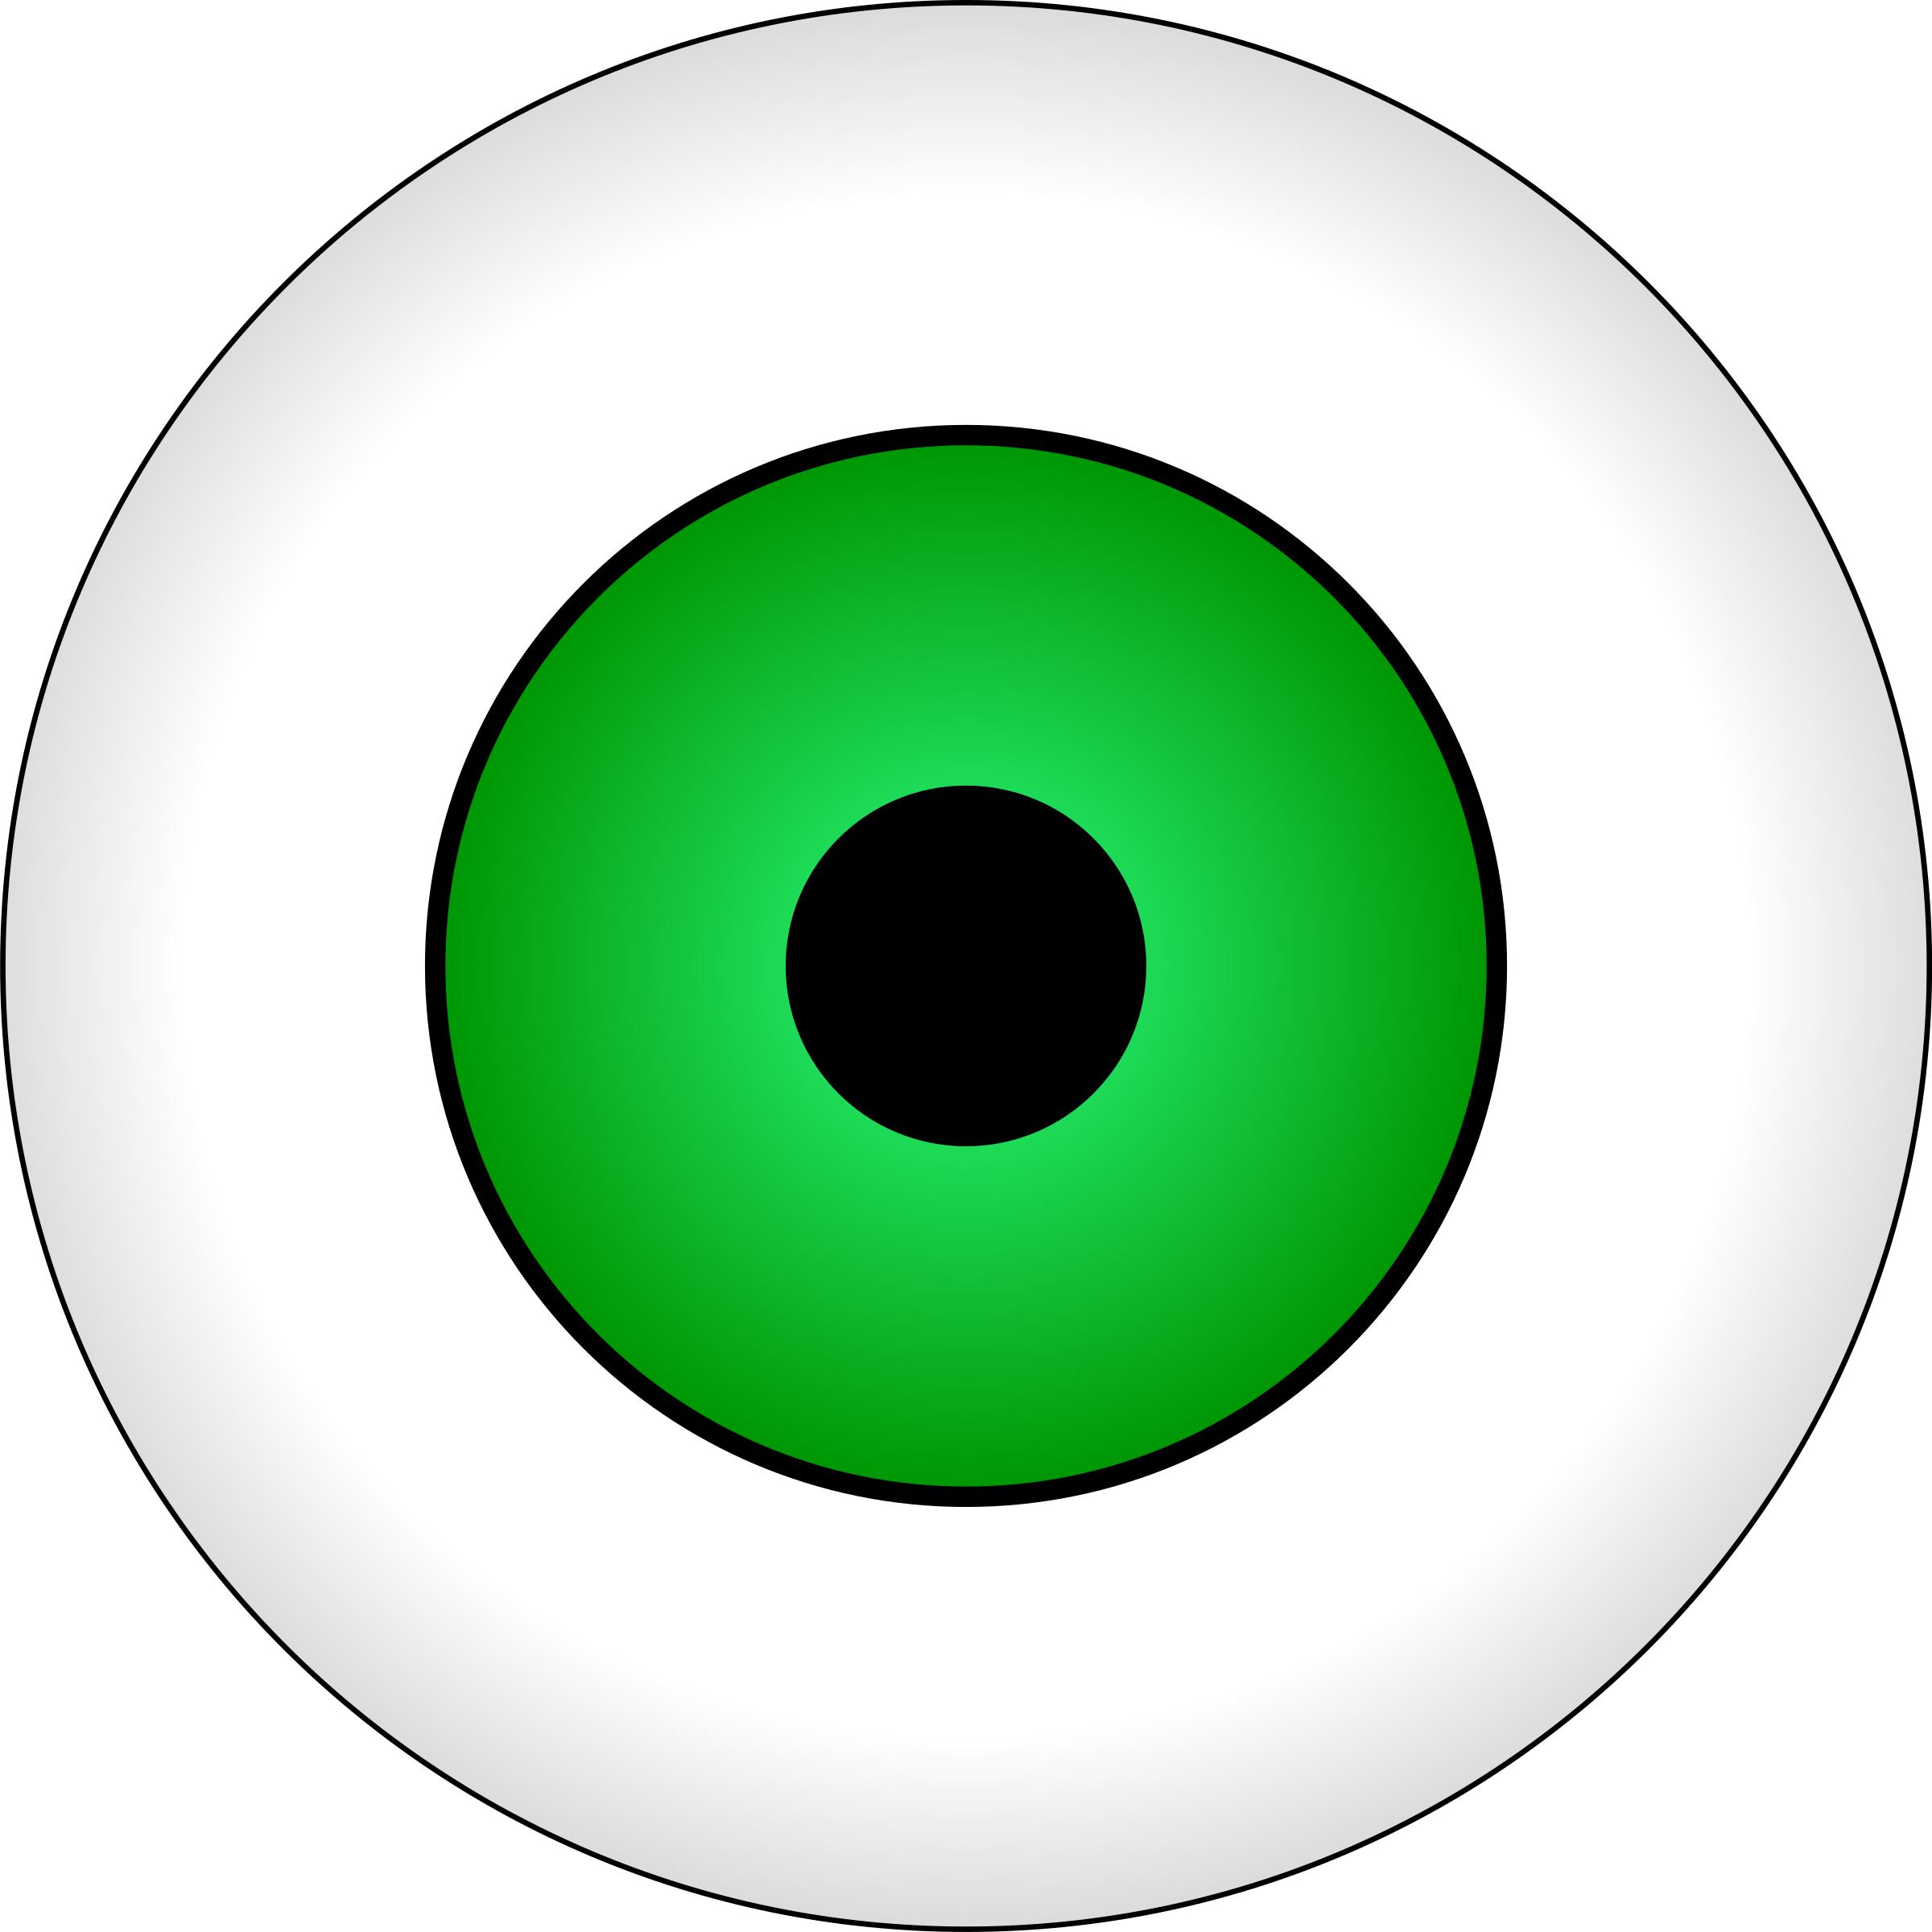 Free Olhos Verdes / Green Eye - Clip Art - (2400x2400) Png Clipart Download...